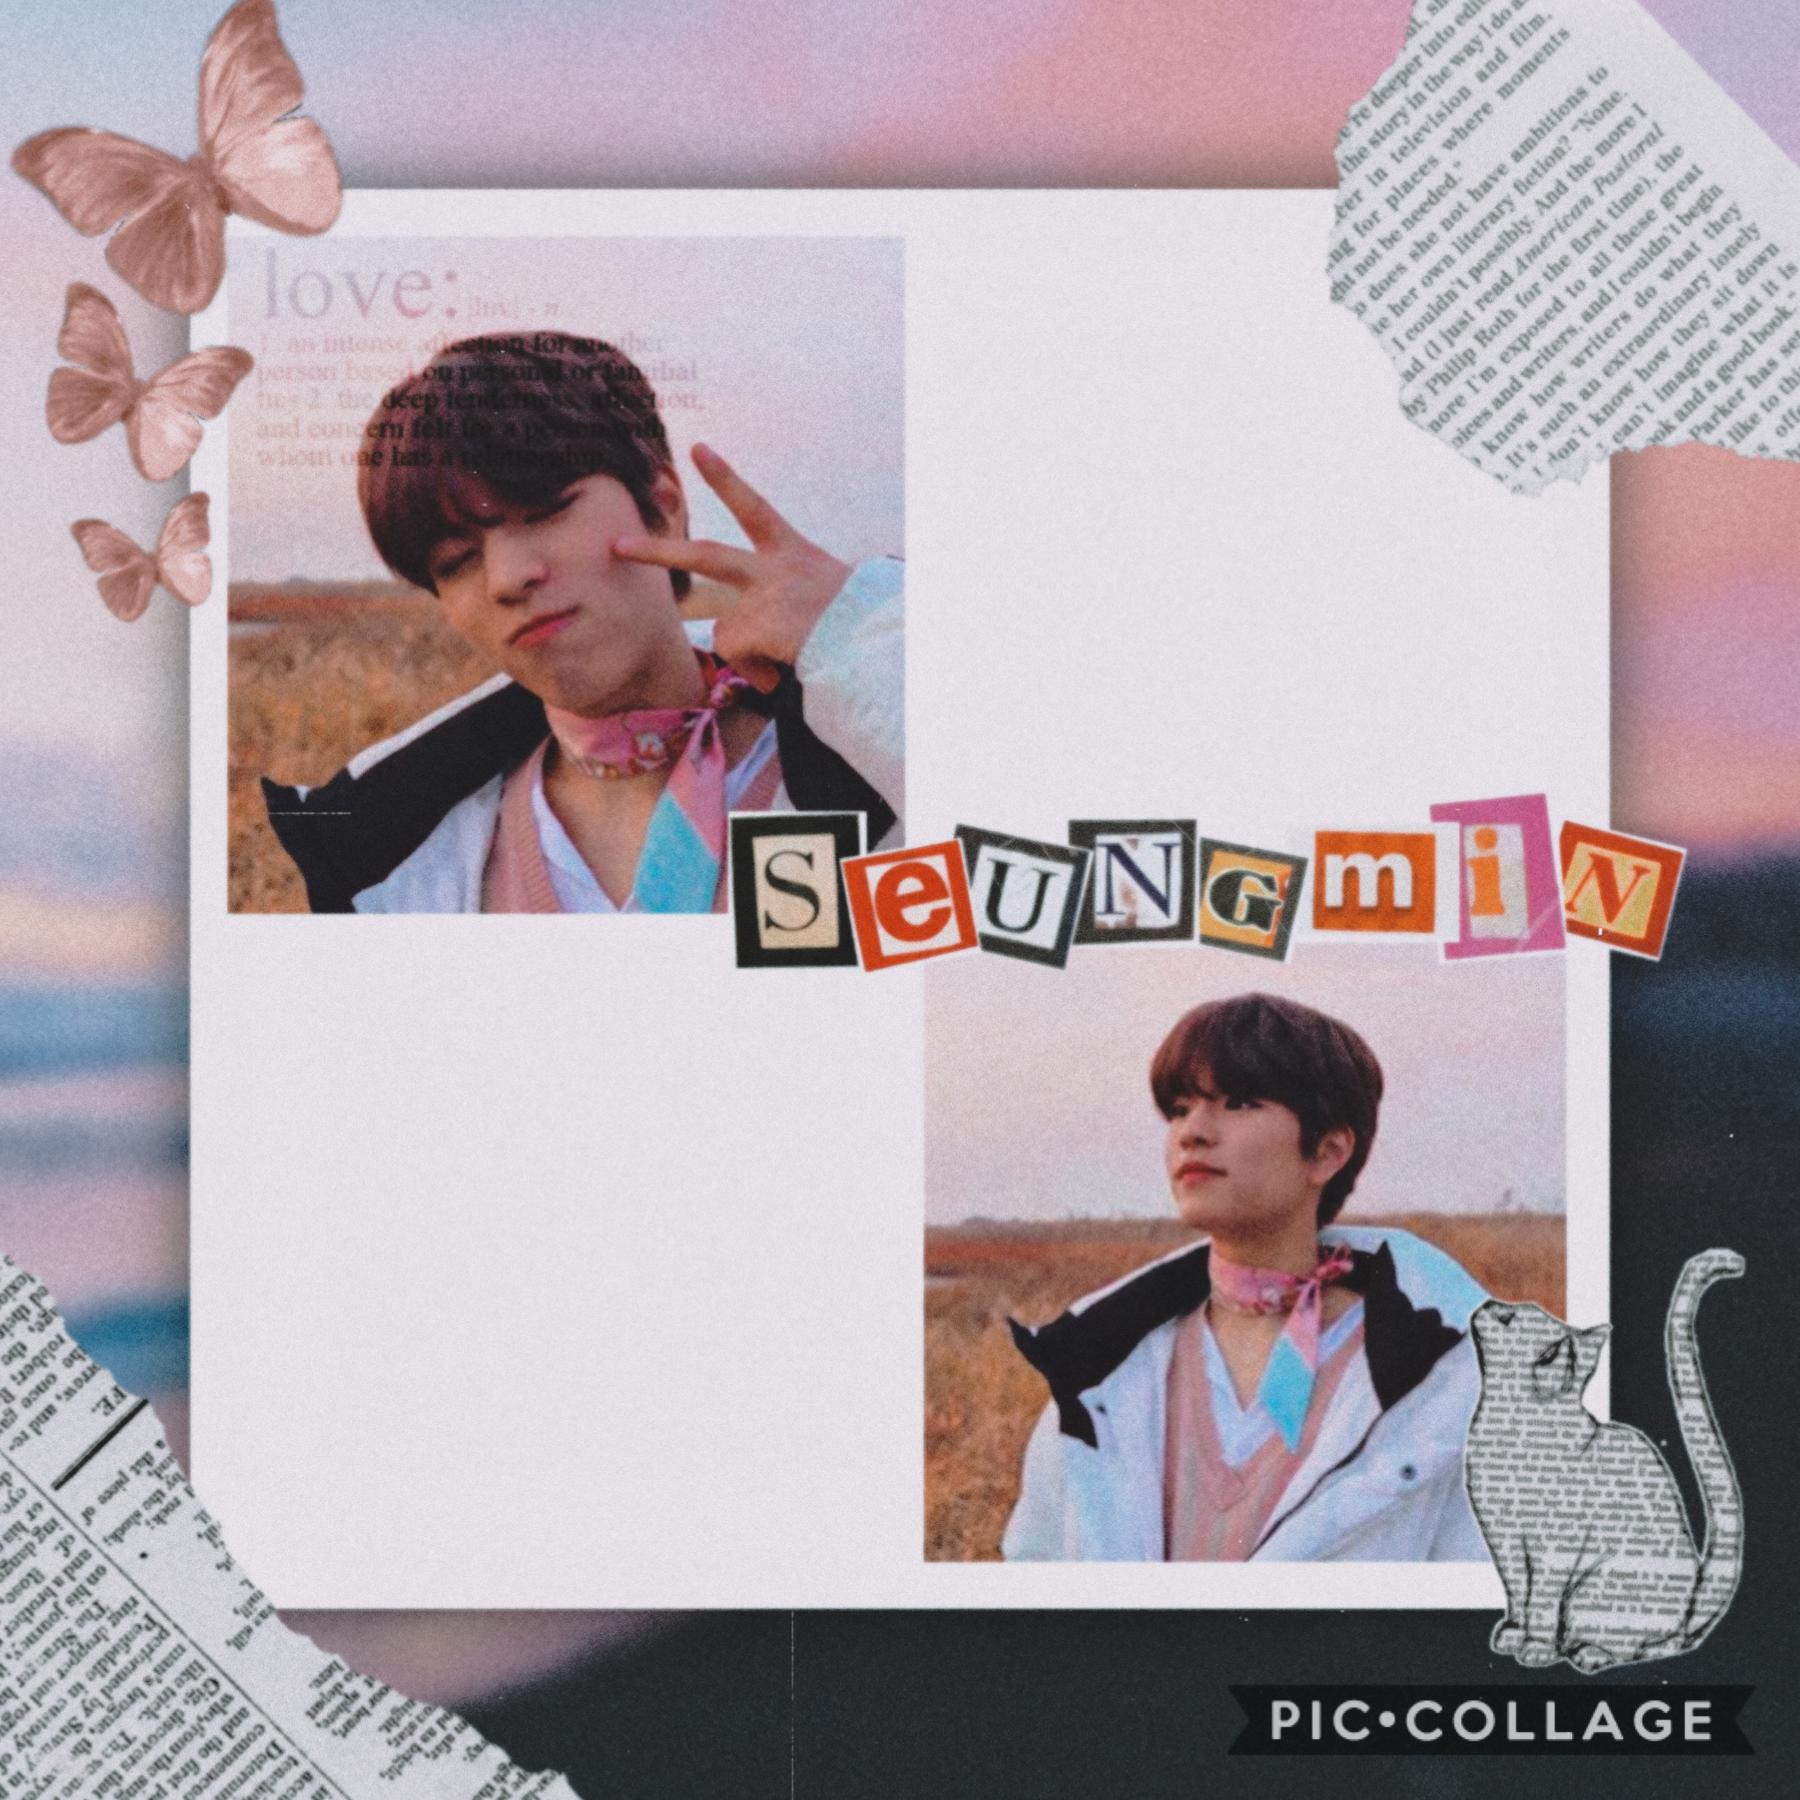 - 💖 -

Seungmin because Seungmin.

Man the only thing I like about this is the 2 pics 😂

The rest is just- 🤮